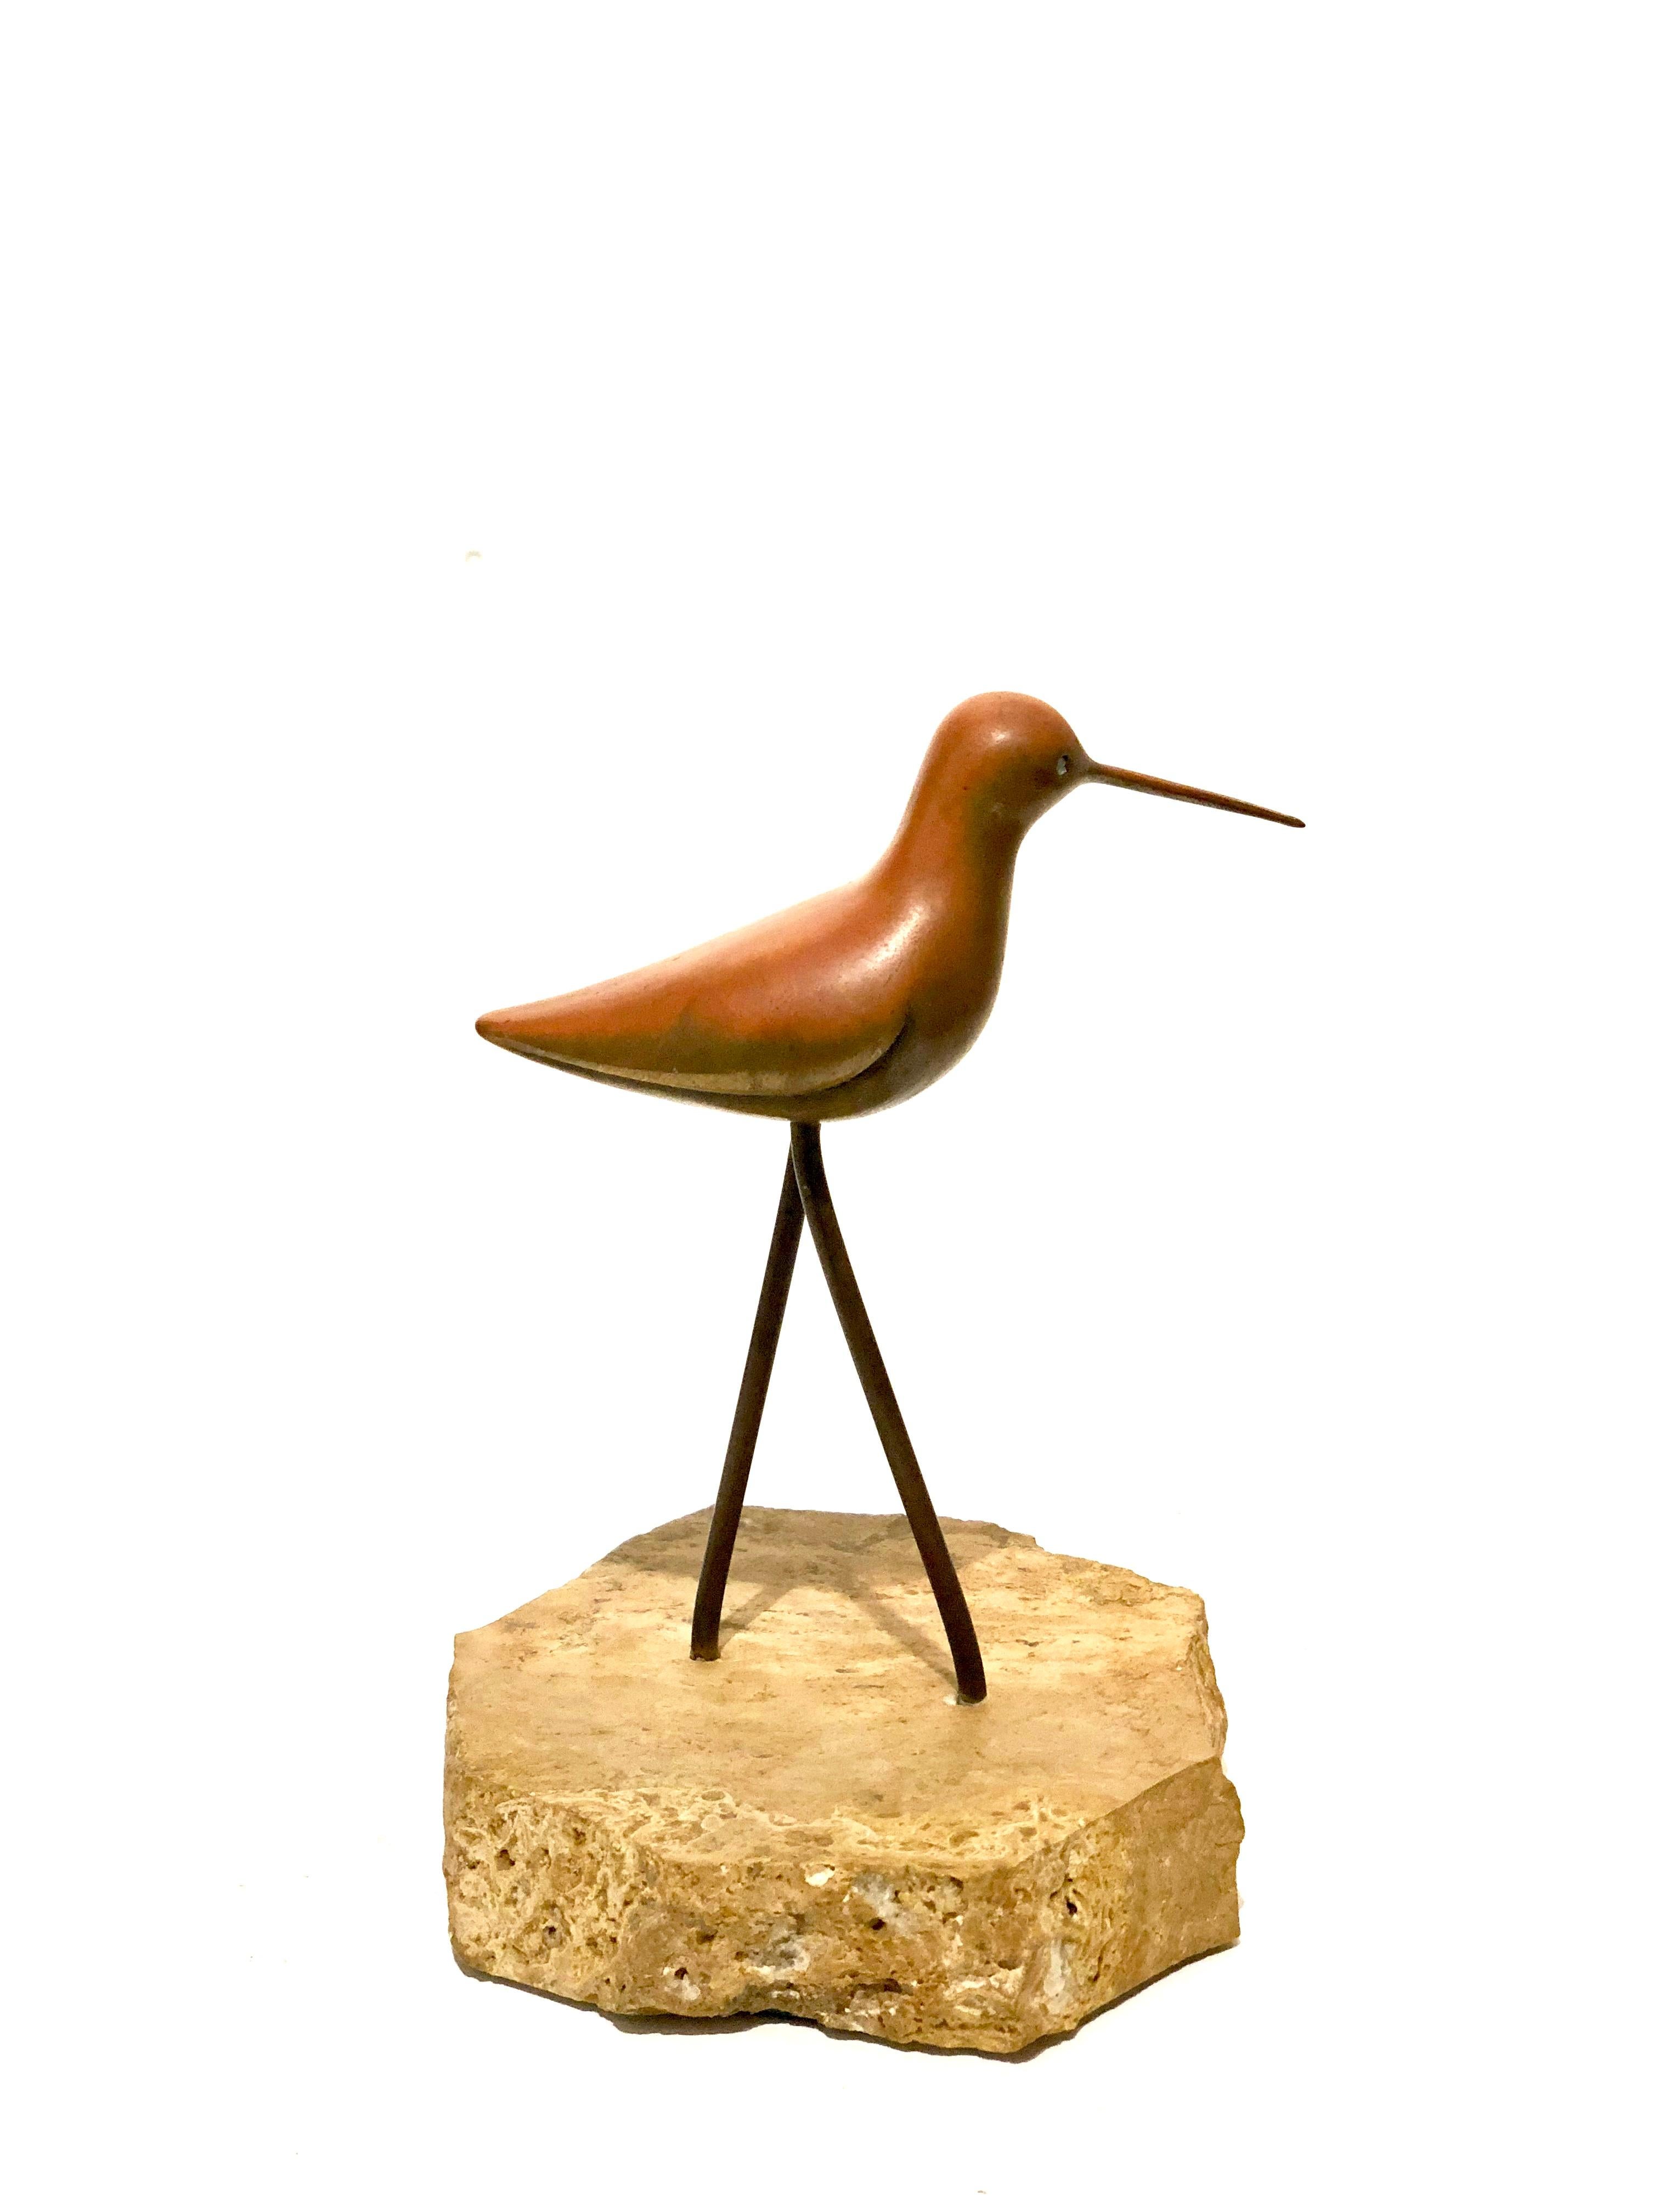 American Petite Solid Patinated Brass Bird Sculpture on Marble Base